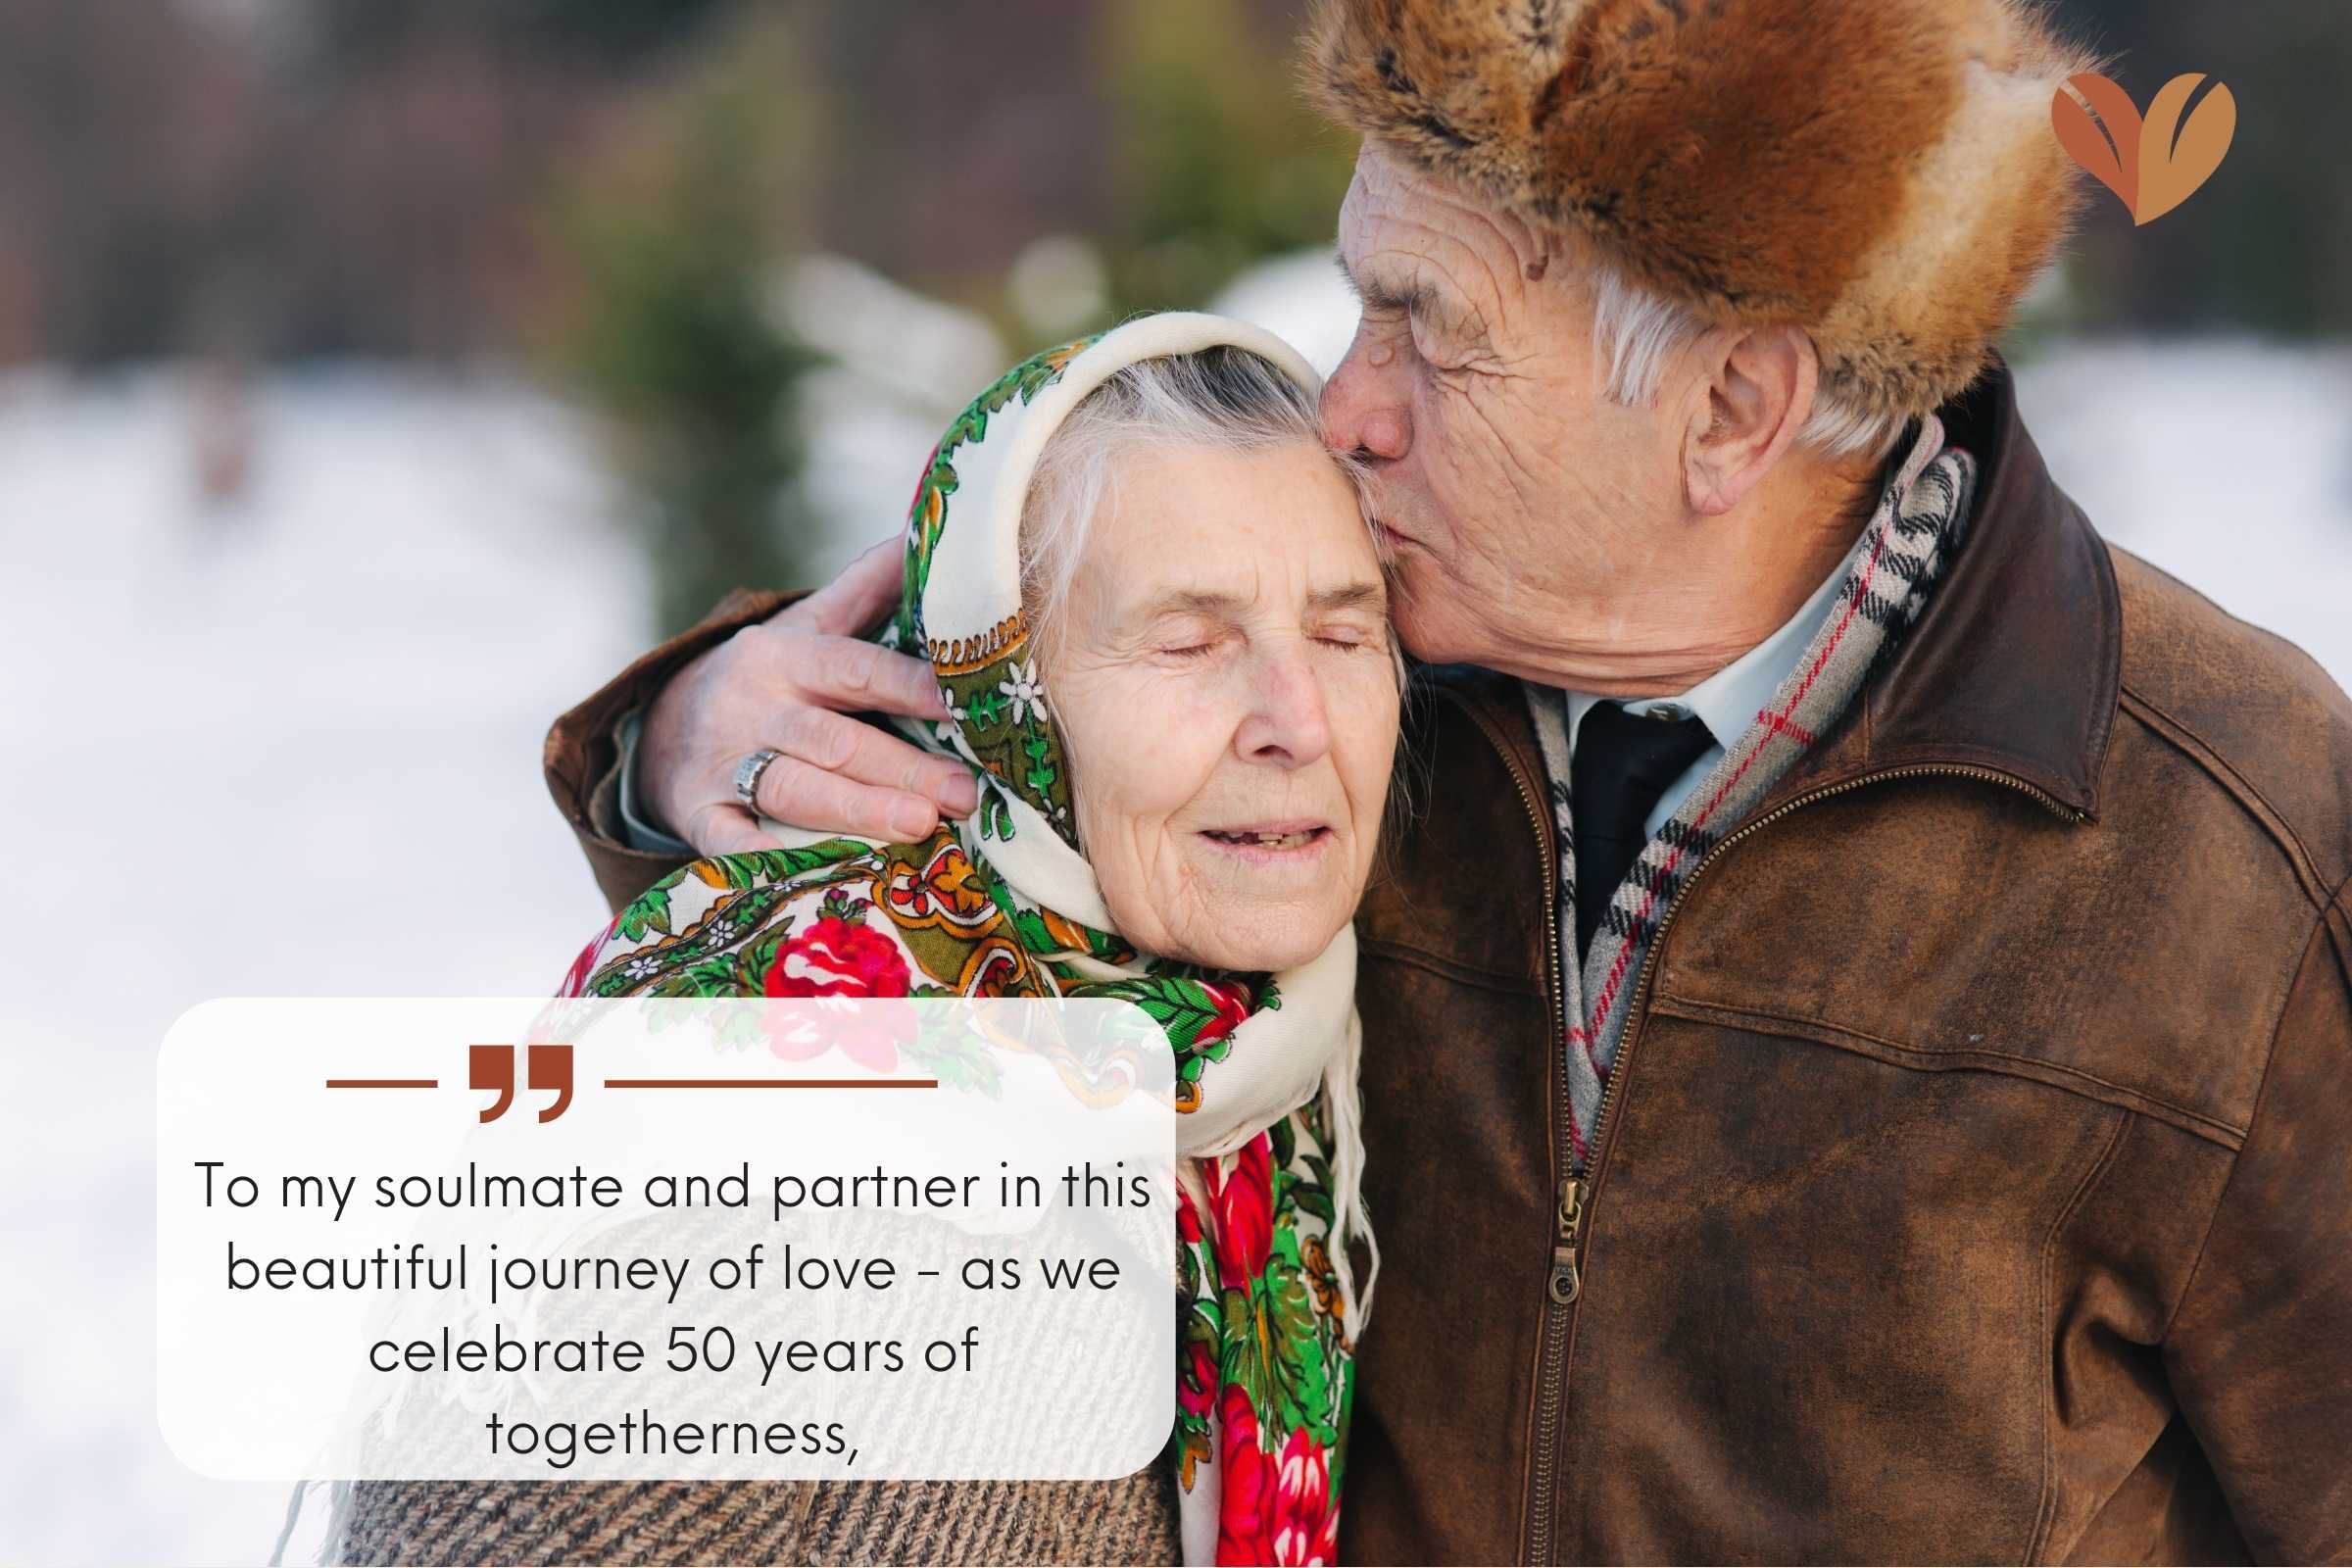 Commemorating 50 years of love with heartfelt wedding anniversary wishes.